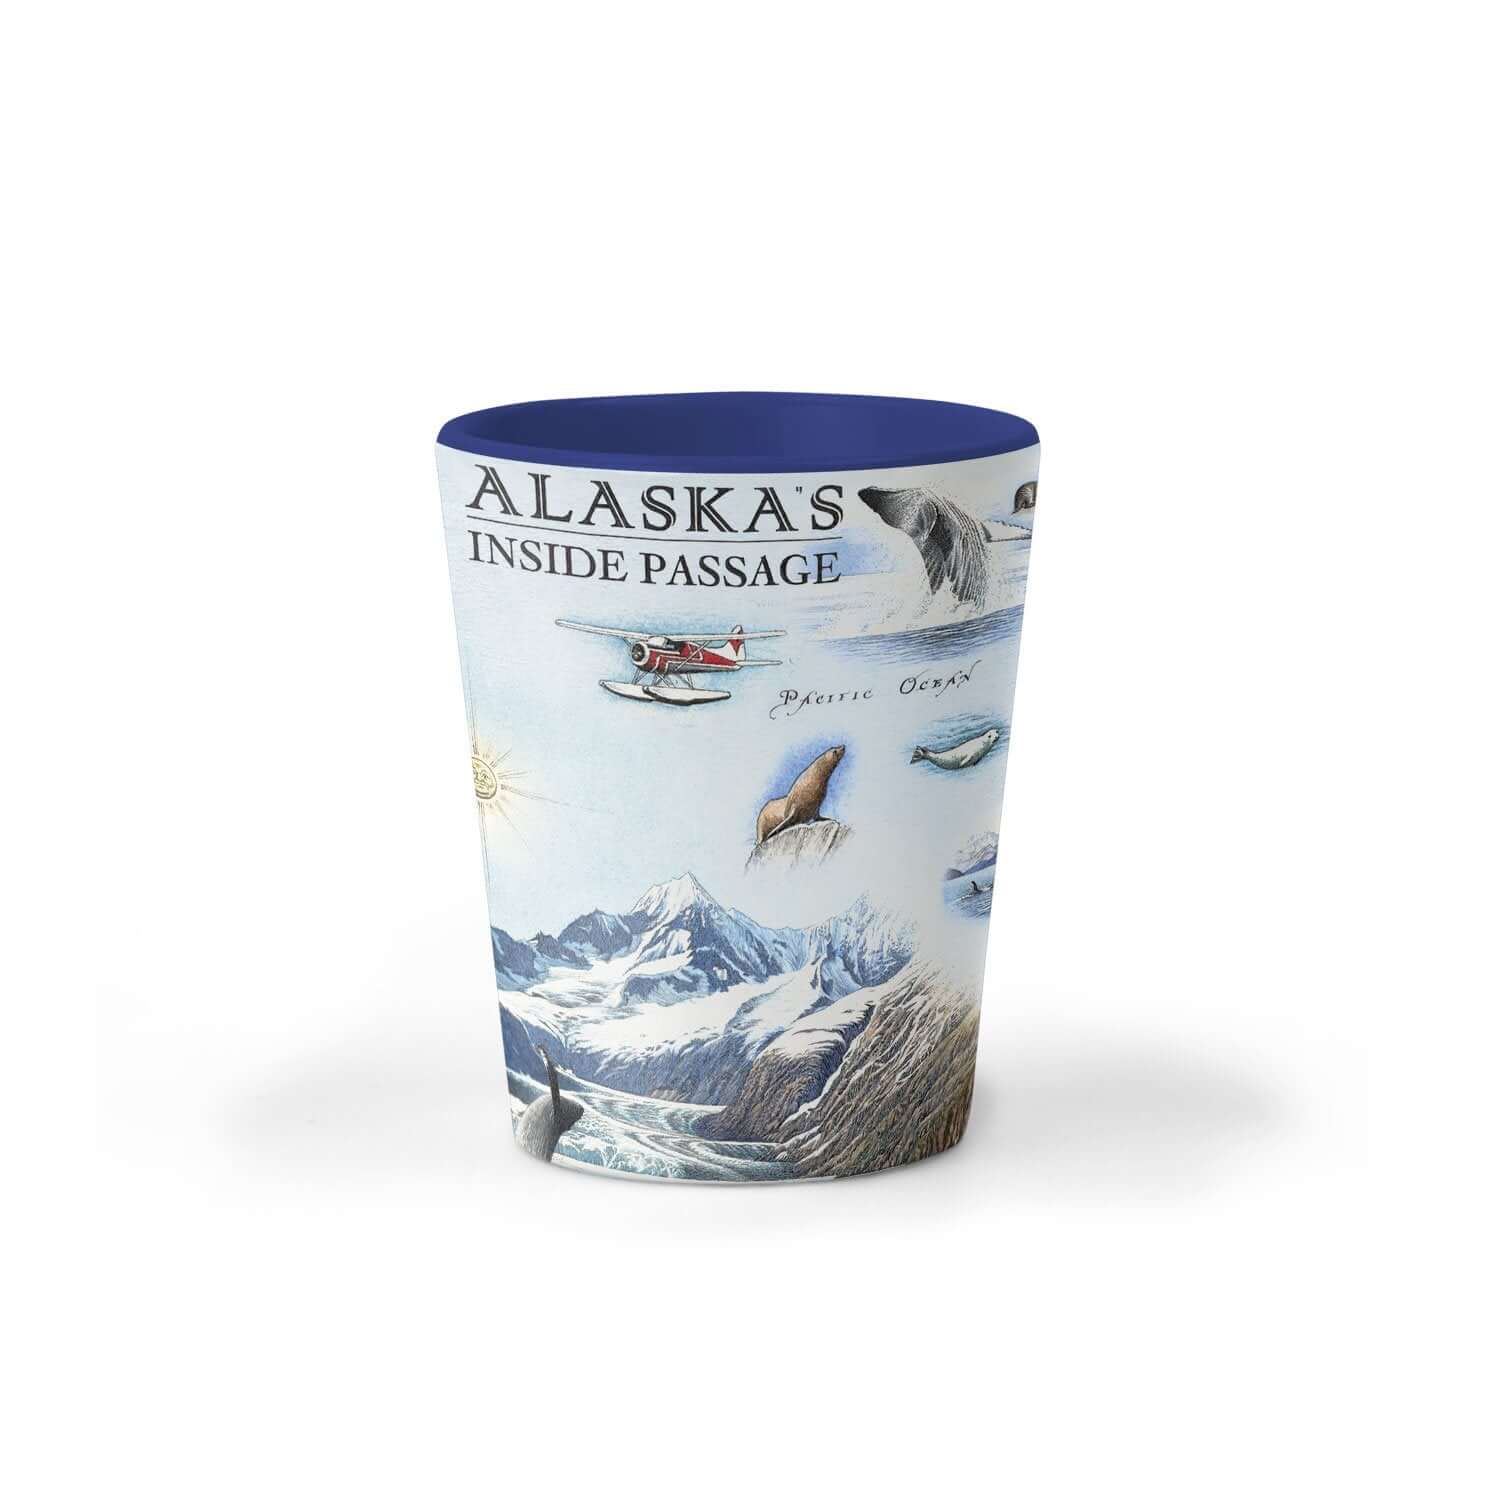 Alaska's Inside Passage Map ceramic shot glass in earth tone colors of blues and greens. The map features bears, whales, mountain goats & sheep. Including the towns of Sitka, Juneau, Ketchikan, and others.